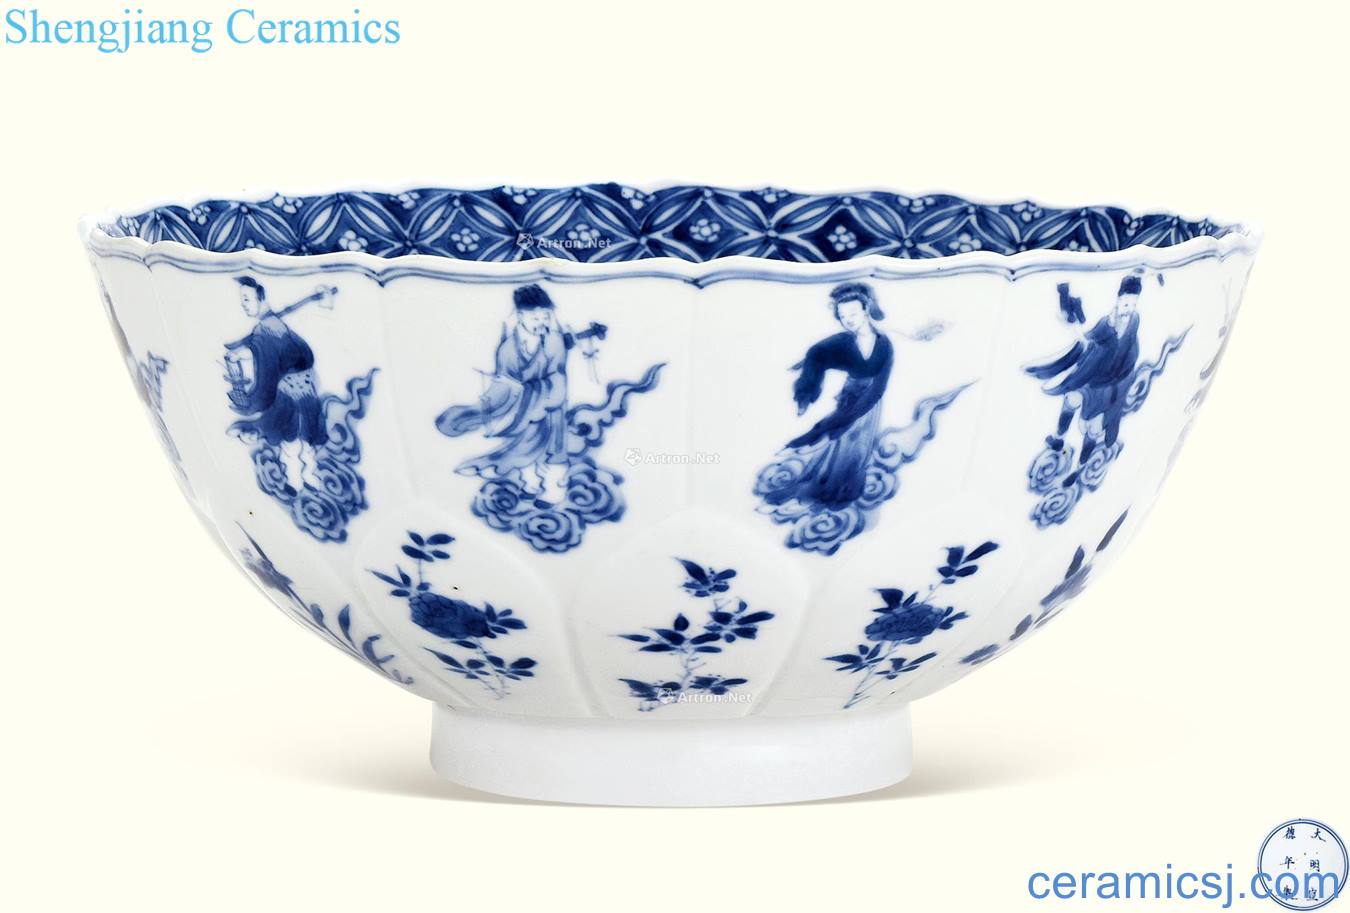 The character of the reign of emperor kangxi green-splashed bowls